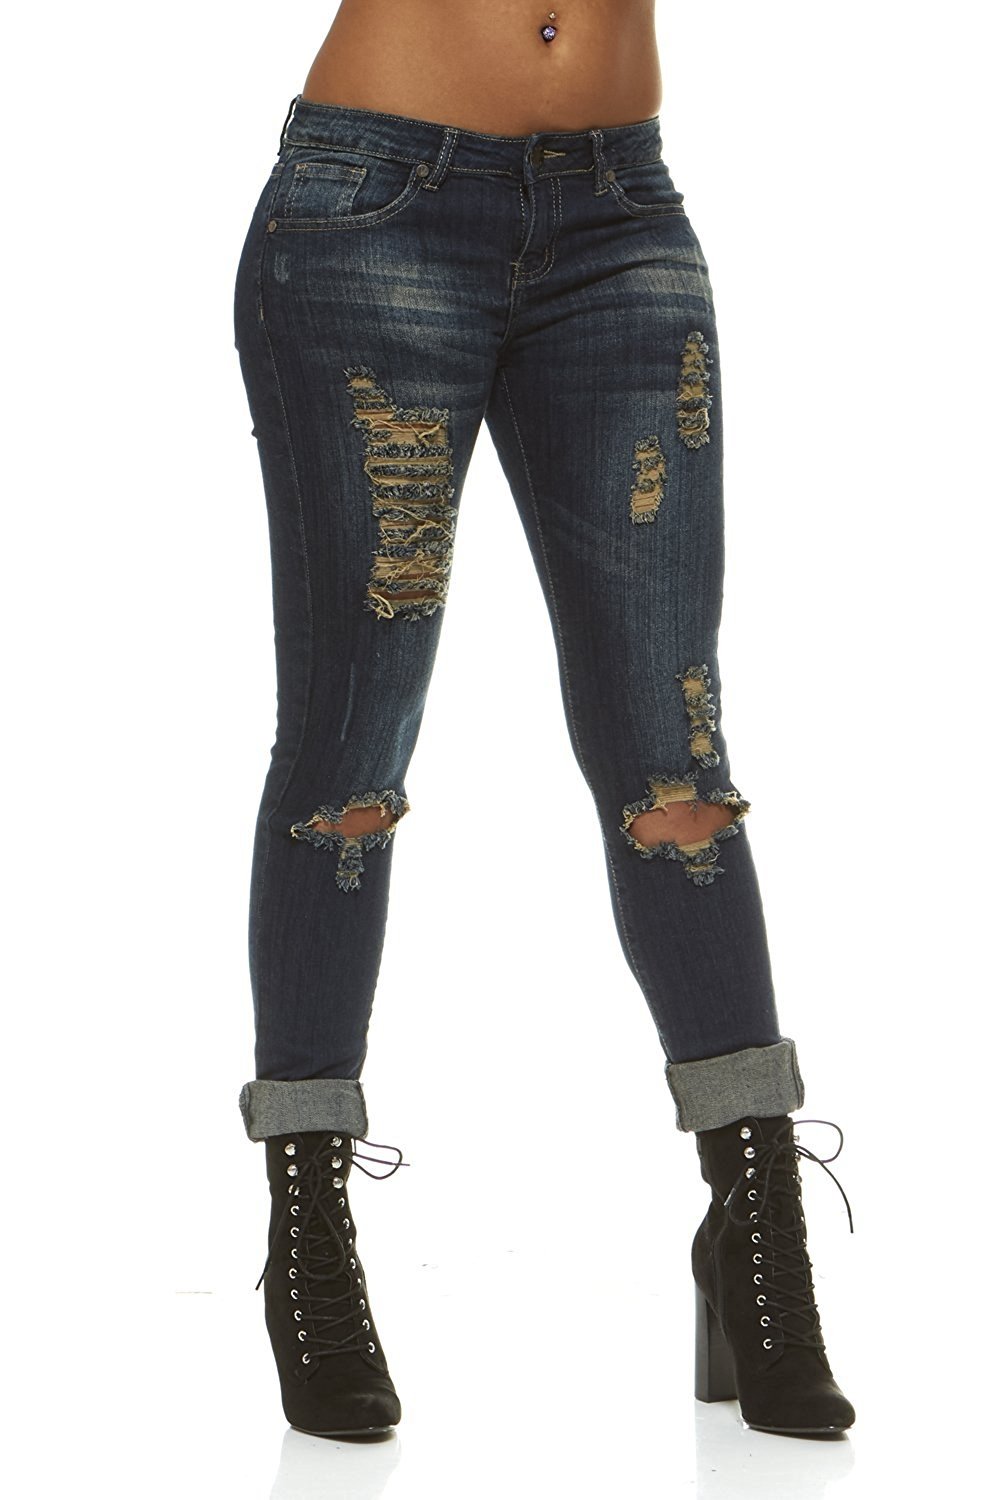 V.I.P.JEANS Ripped Distressed Washed Skinny Stretch Jeans For Women Junior or Plus Sizes - image 1 of 8